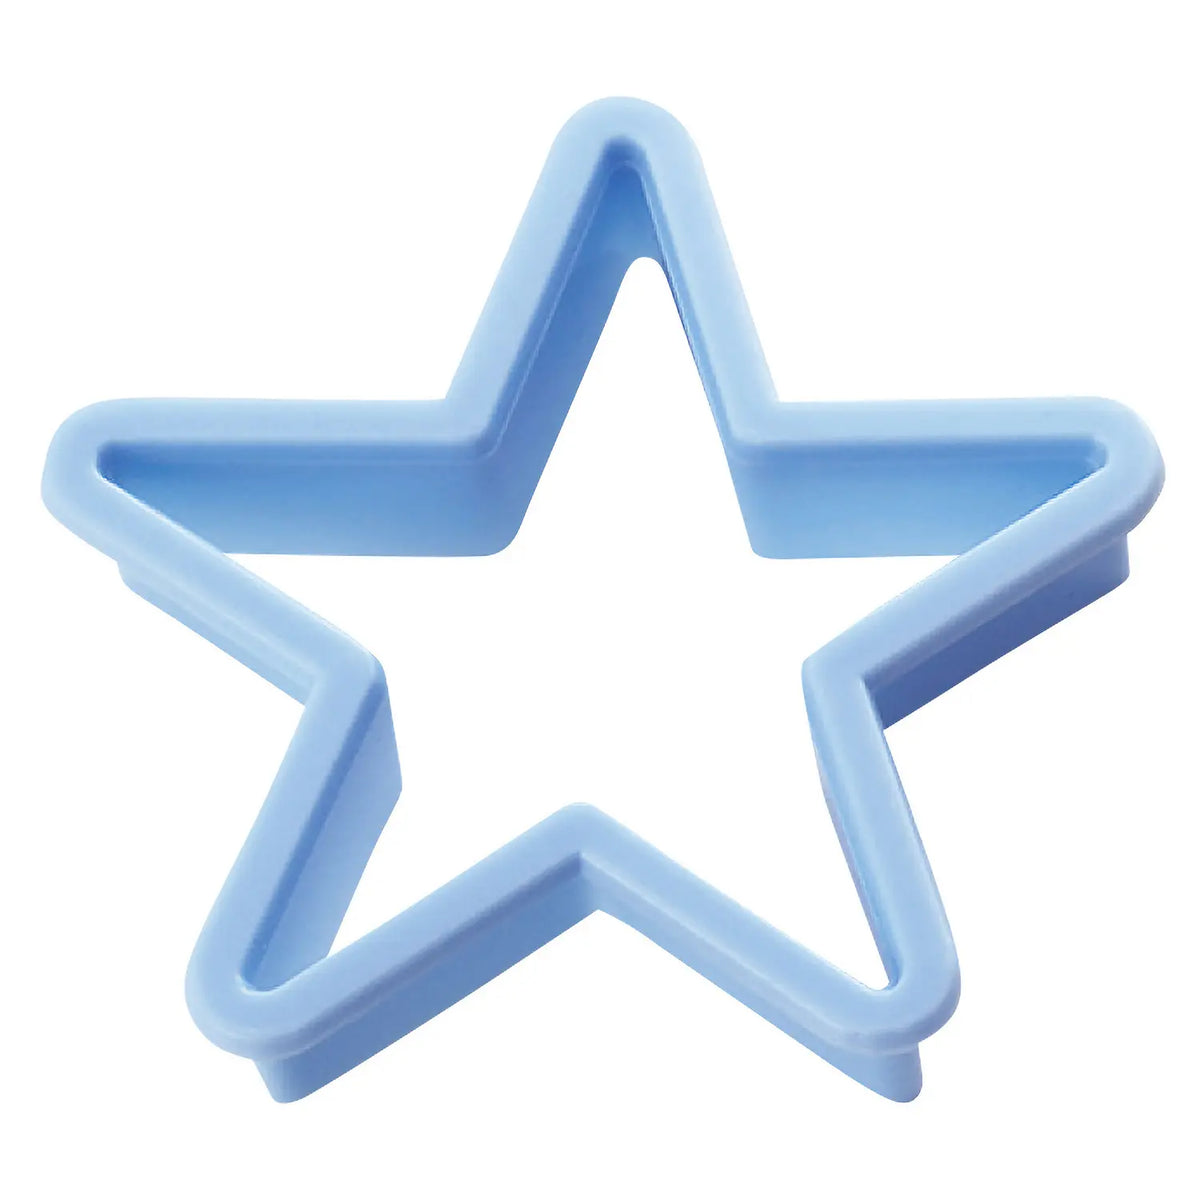 TIGERCROWN Cake Land ABS Resin Cookie Cutter Star